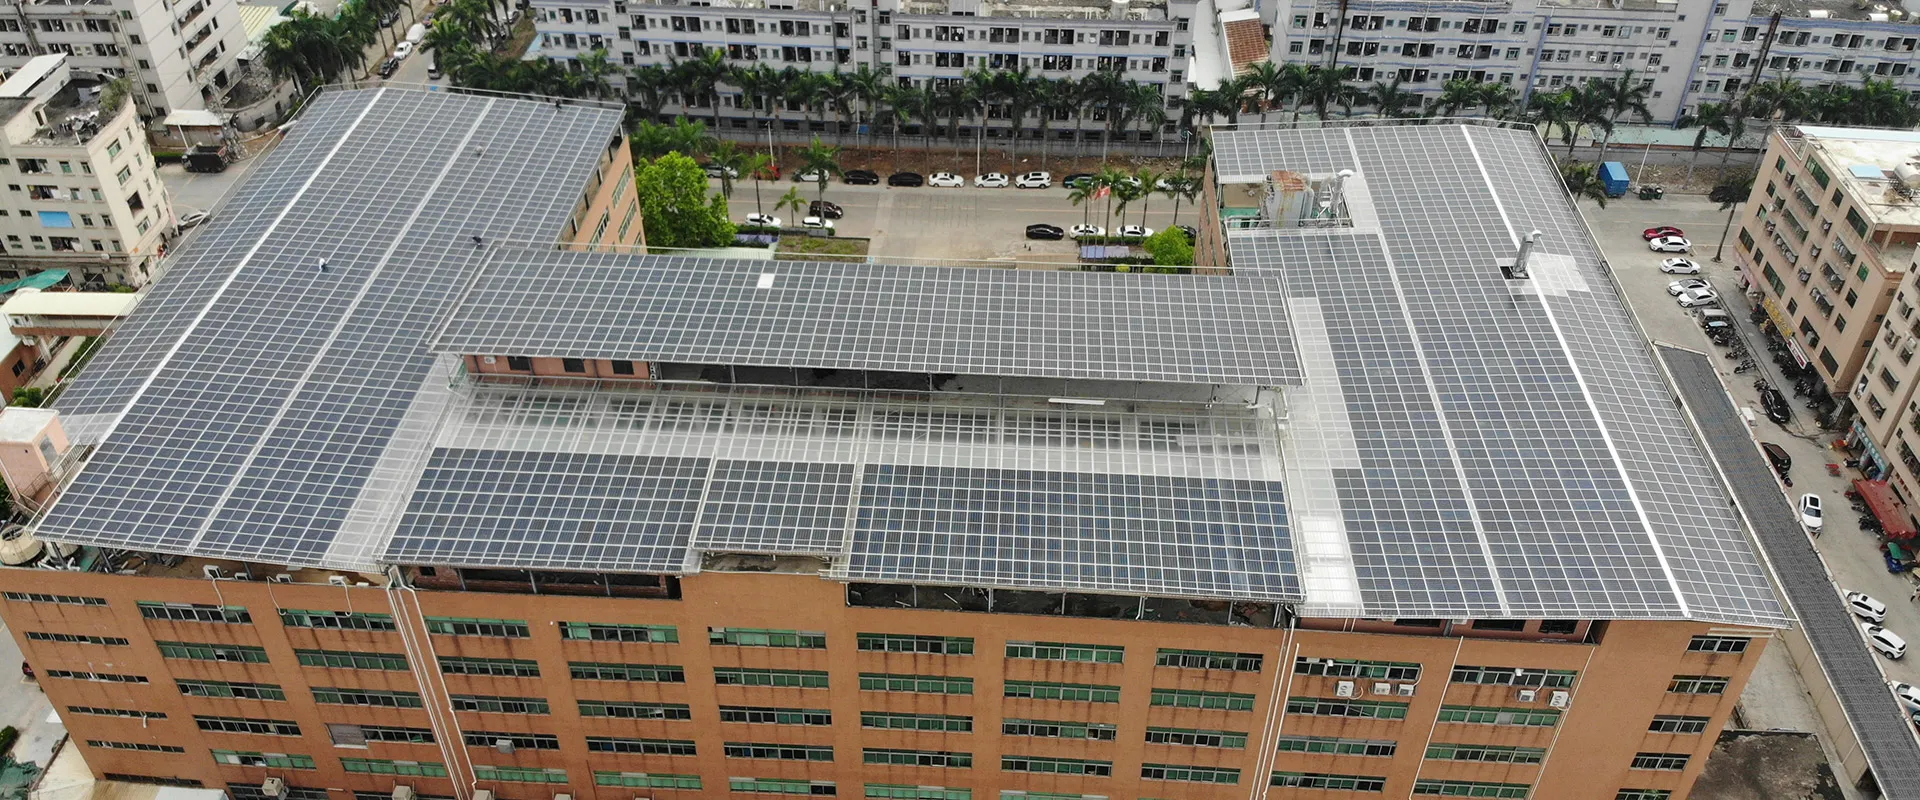 Dongguan Grid-Tied of 873KW Solar Power System